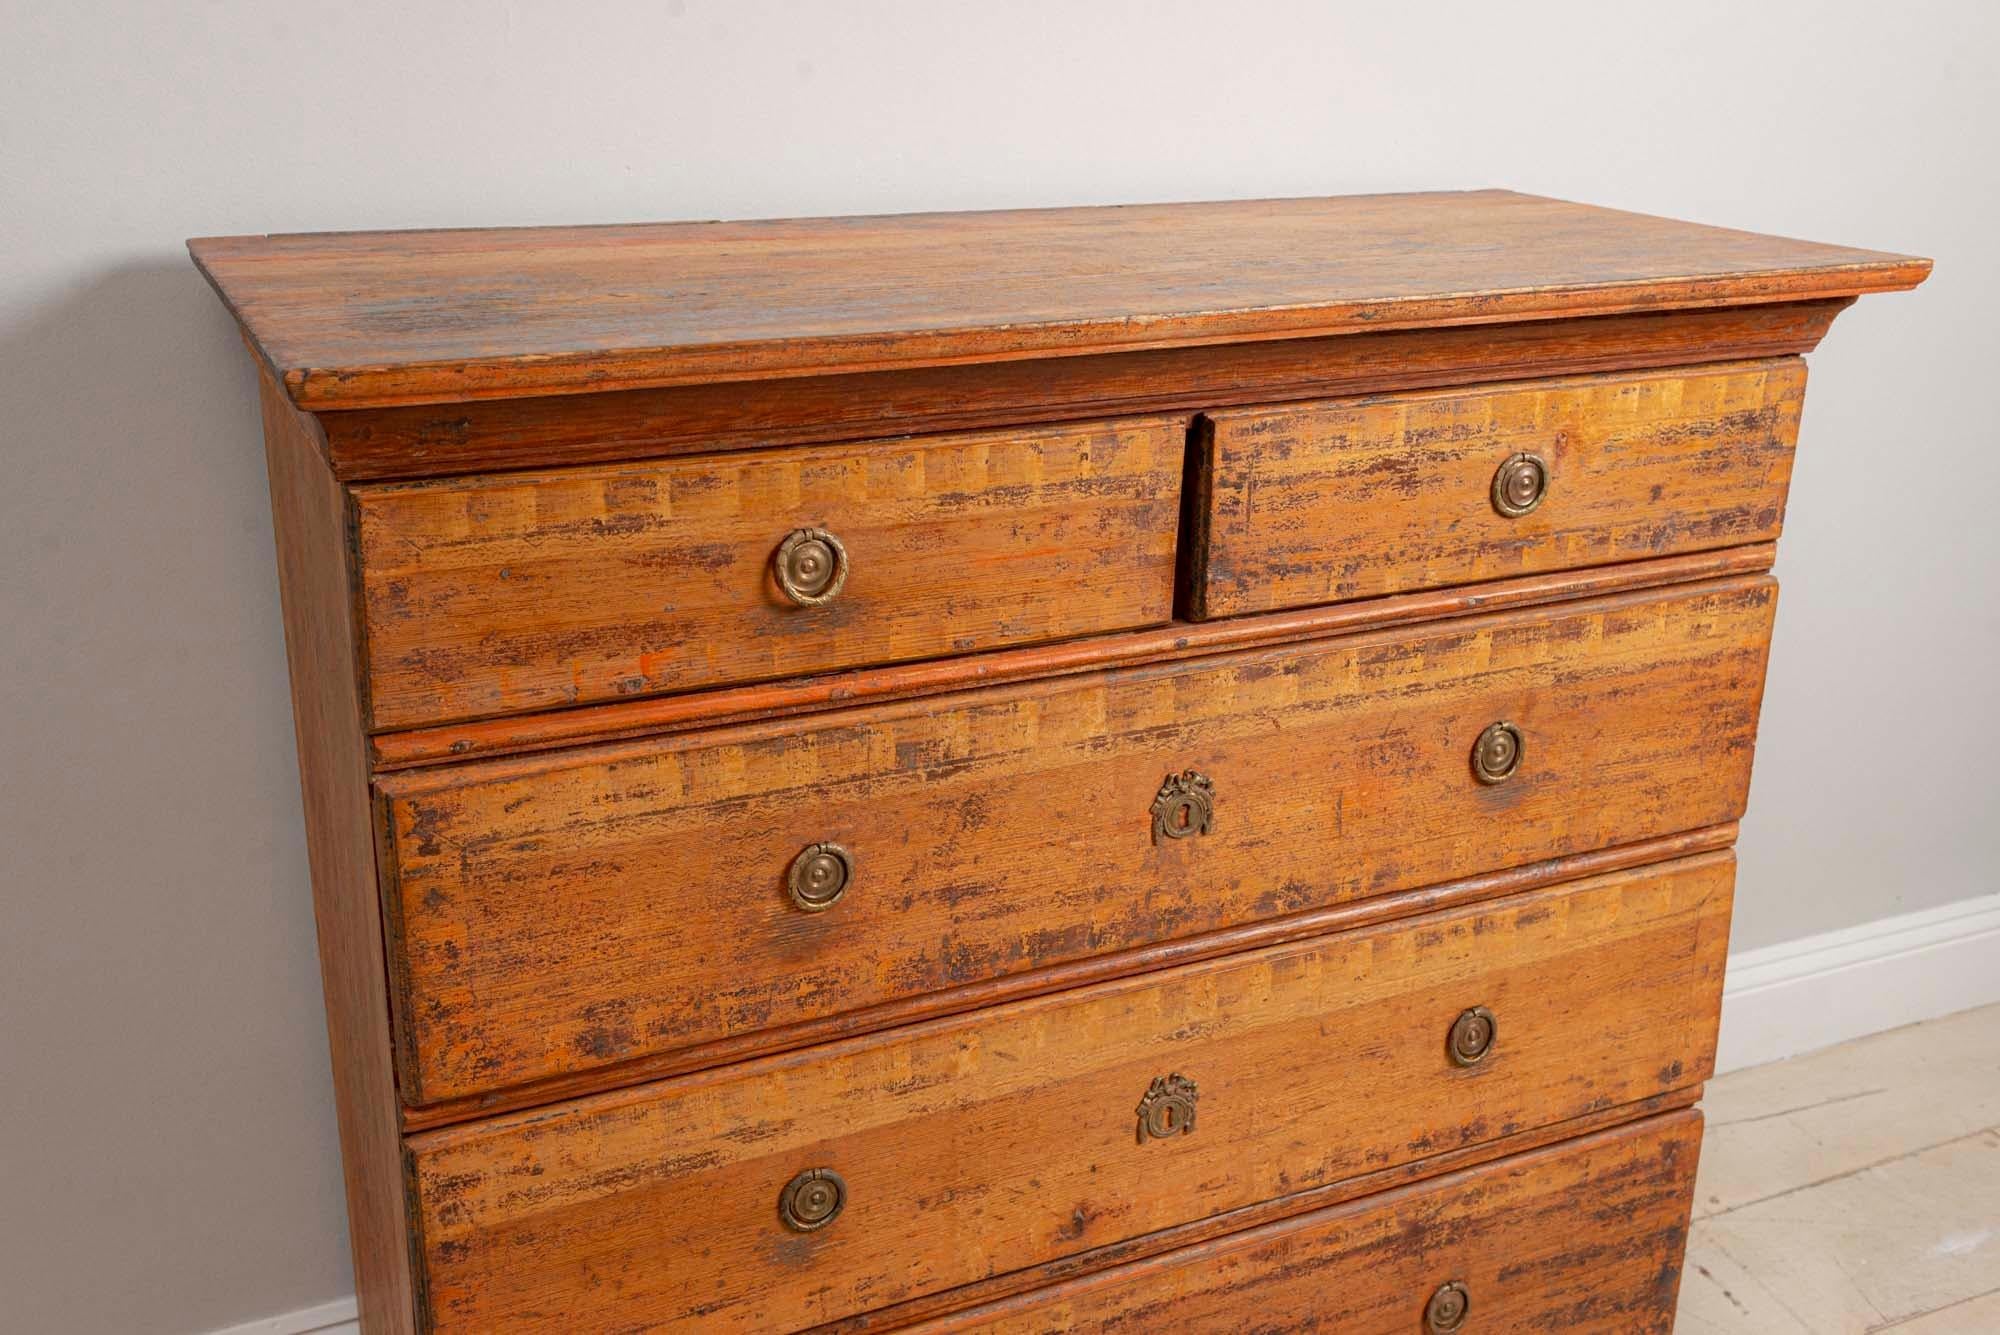 Gustavian 18th Century Swedish Characterful Painted 'Folk' Chest of Drawers or Commode